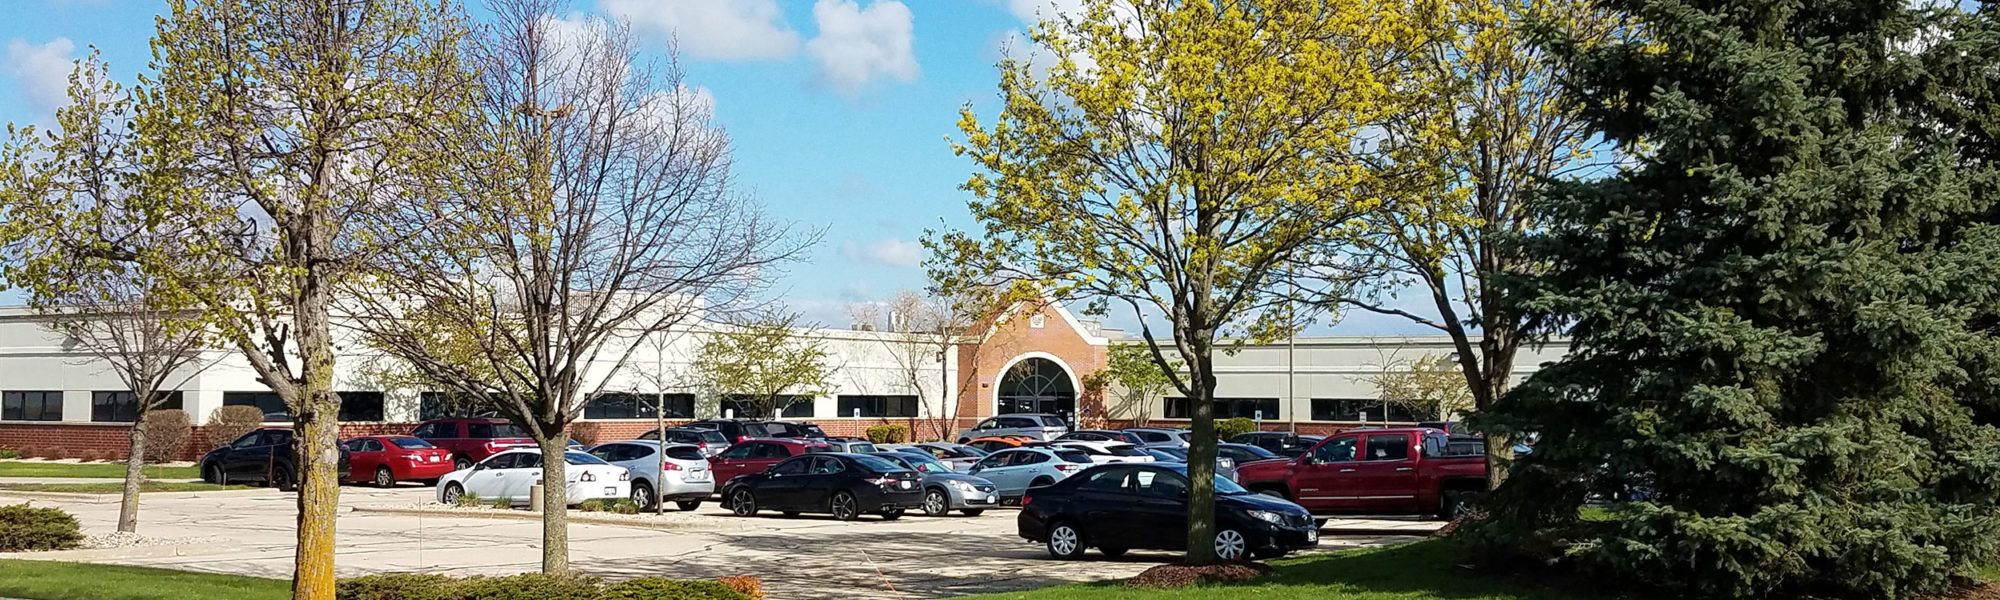 View of a parking lot and the exterior of a shopping center